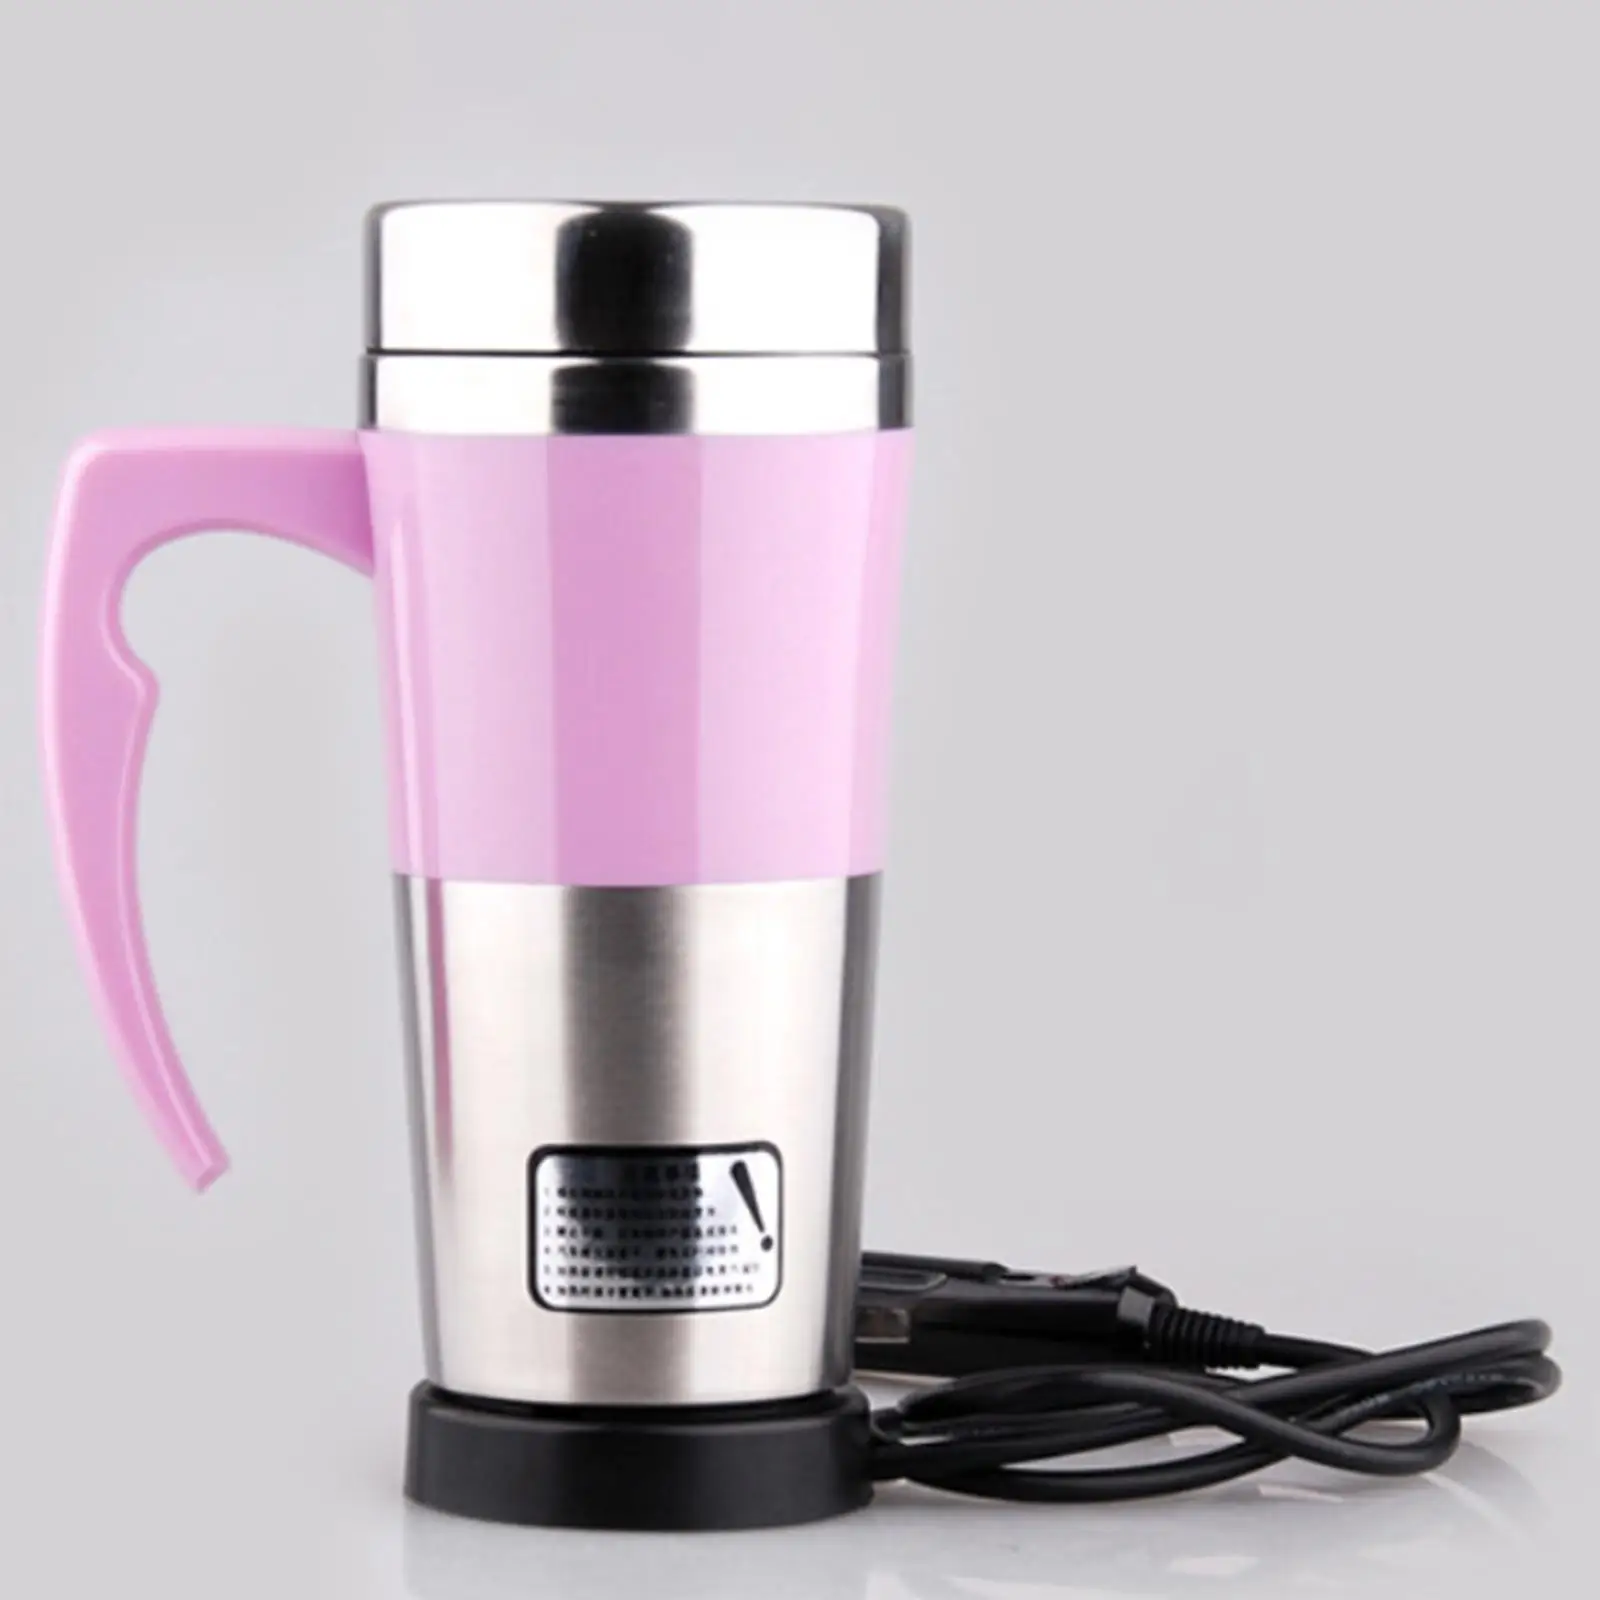  Kettle /12V/ 350ml/  Stainless Steel/ Mug/ Travel /Heating Cup/ Car  for Tea  Eggs Camping Boat